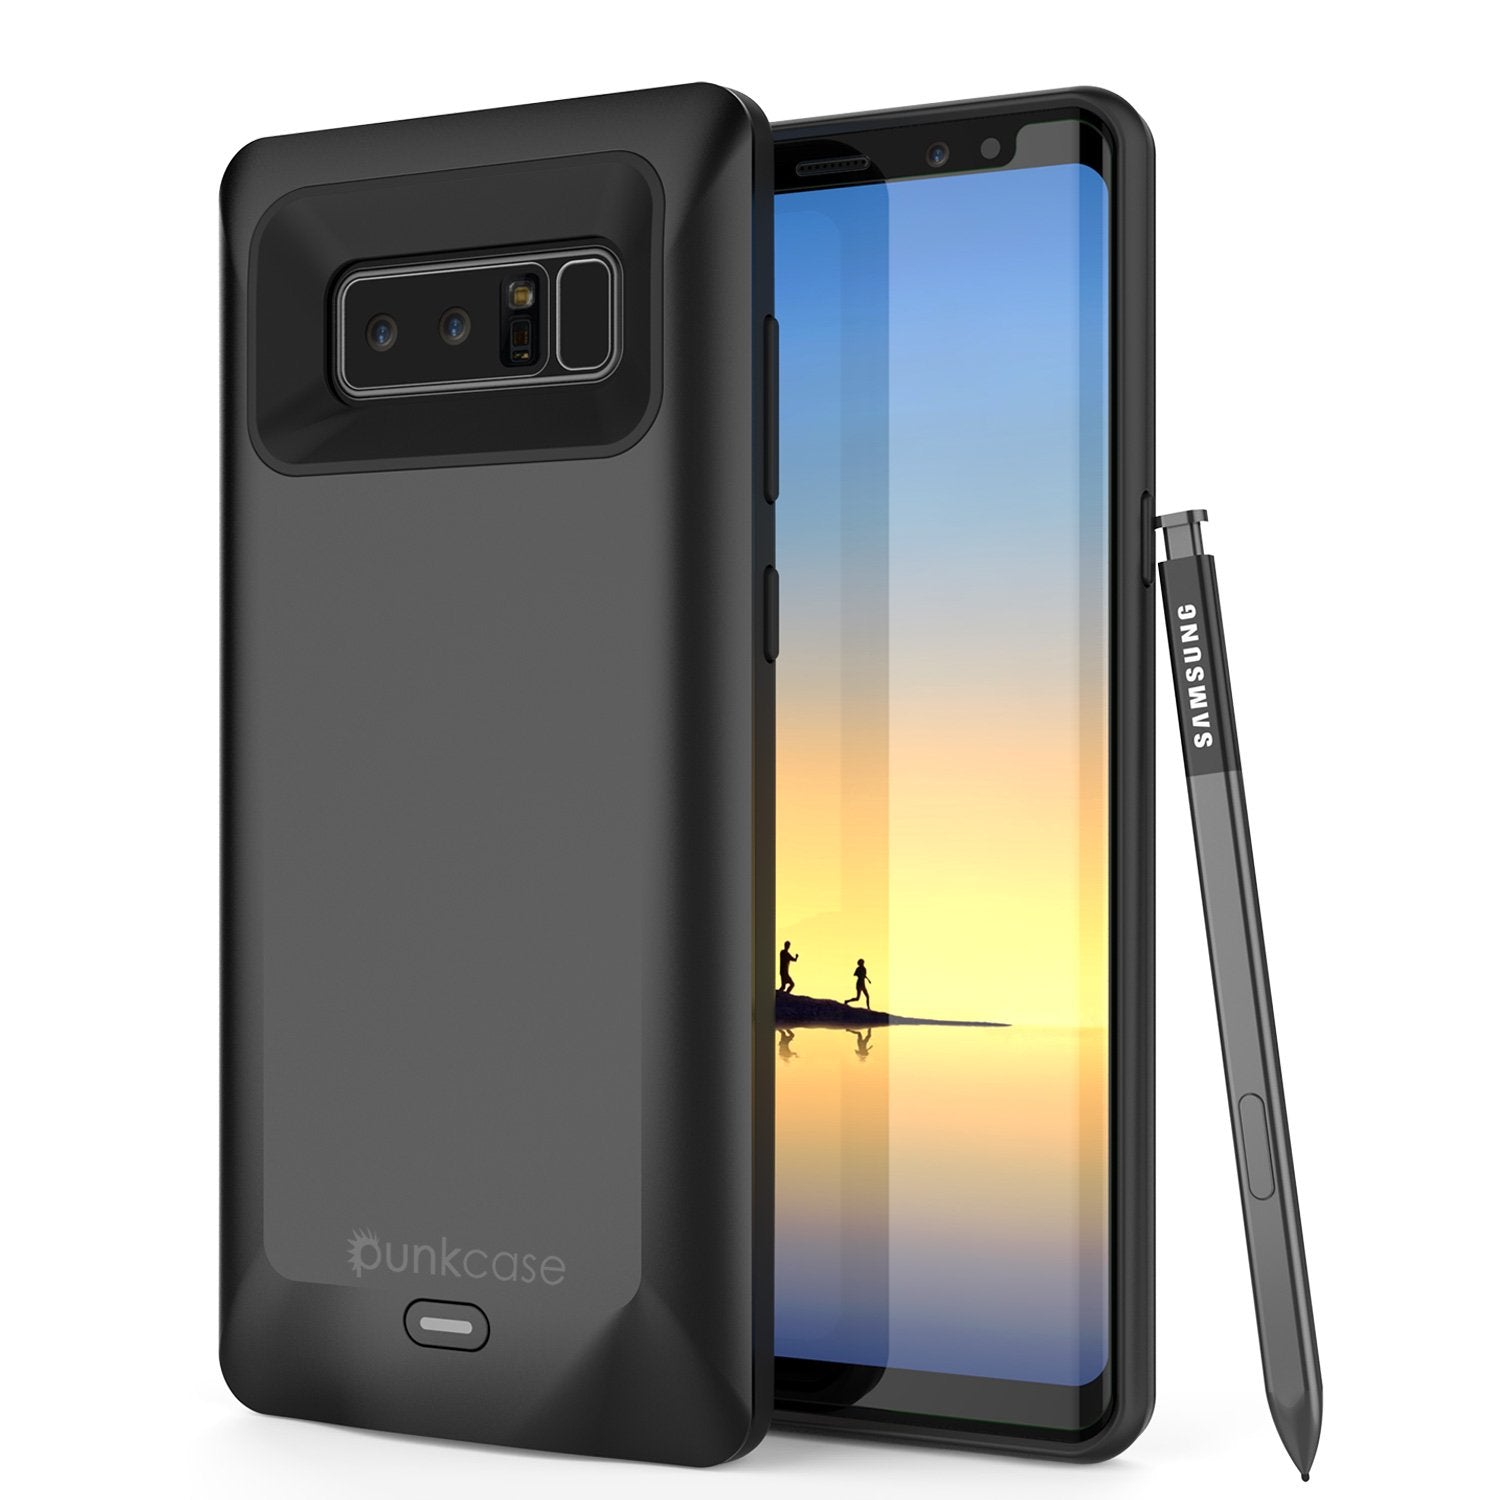 Galaxy Note 8 5000mAH Battery Charger Case W/ Screen Protector [Blue]